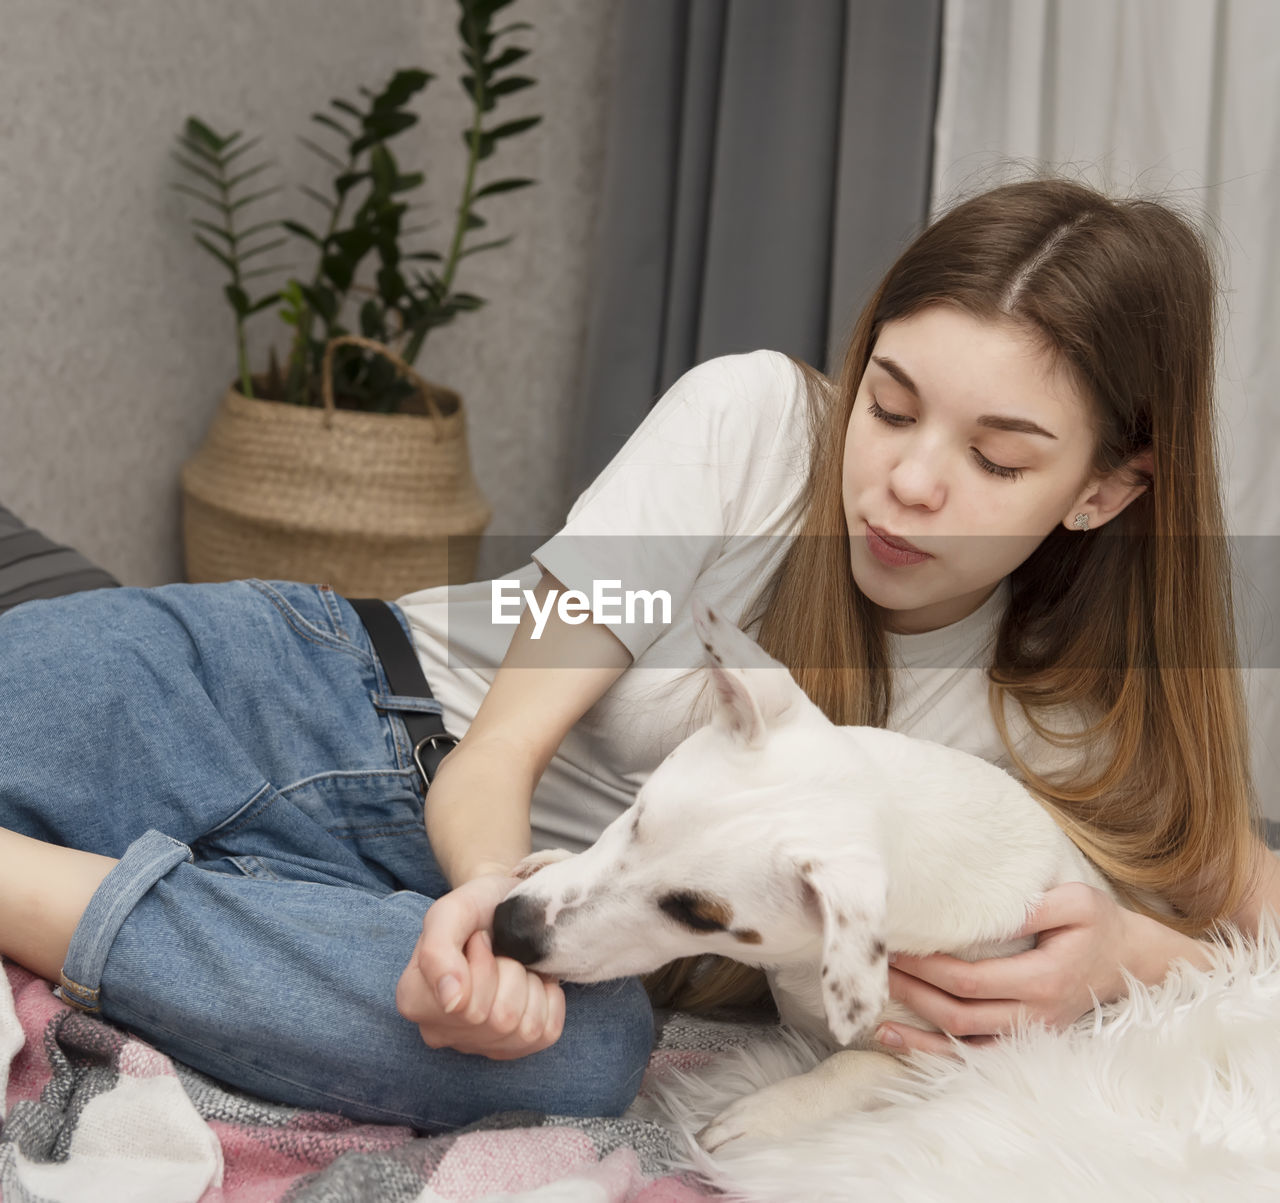 Girl playing with dog on bed at home